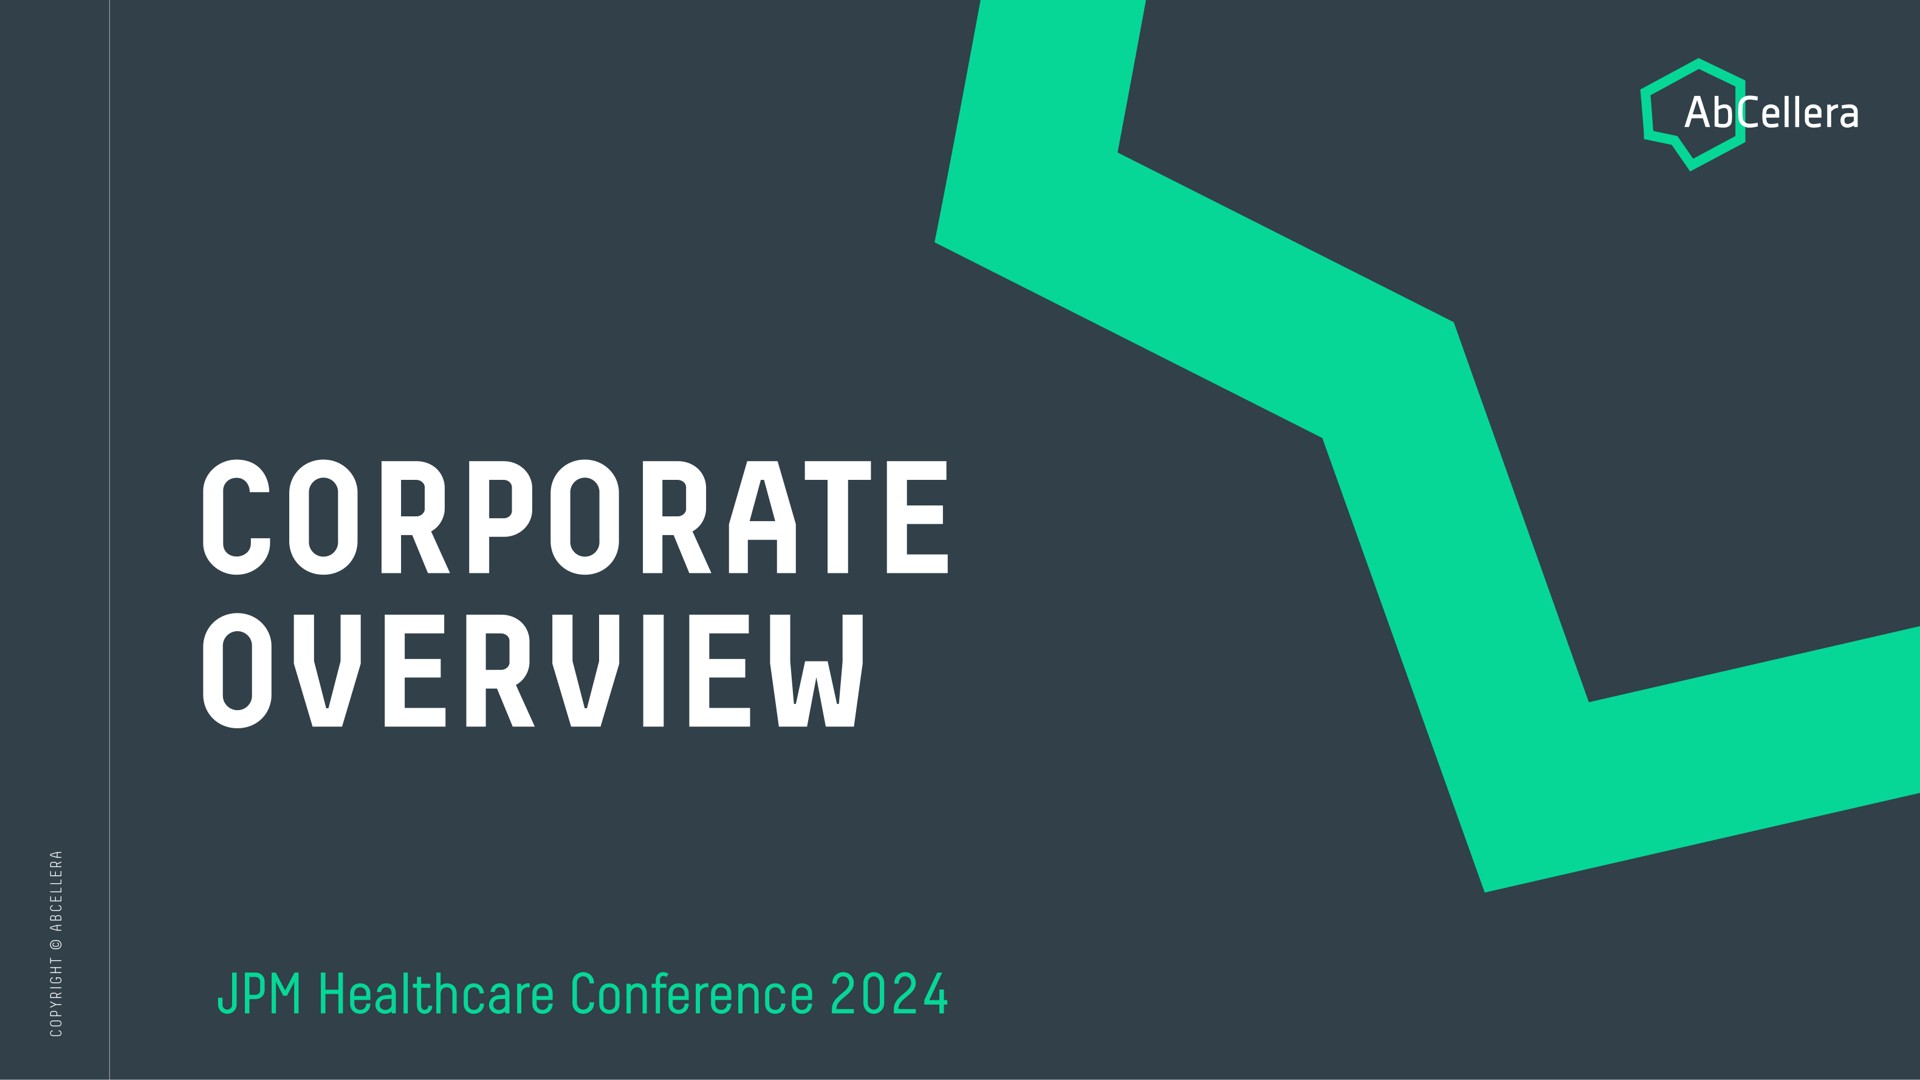 corporate overview conference | AbCellera